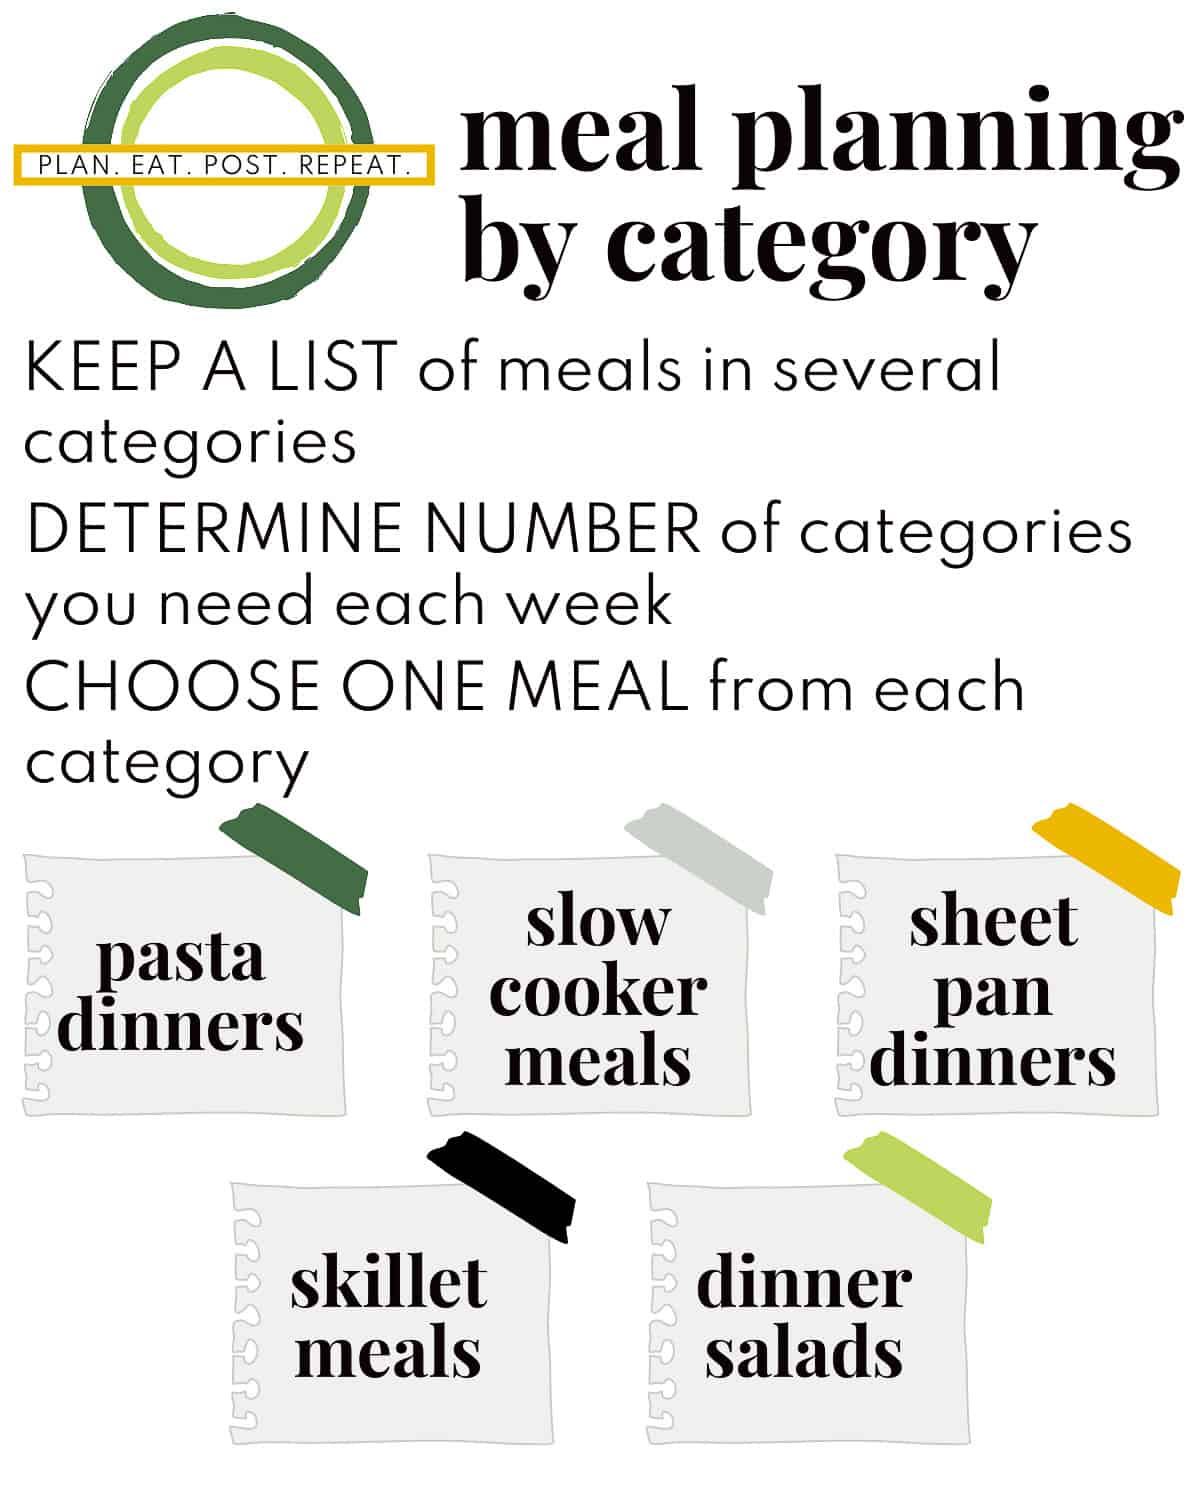 a graphic summarizing creating a meal plan using the category framework.